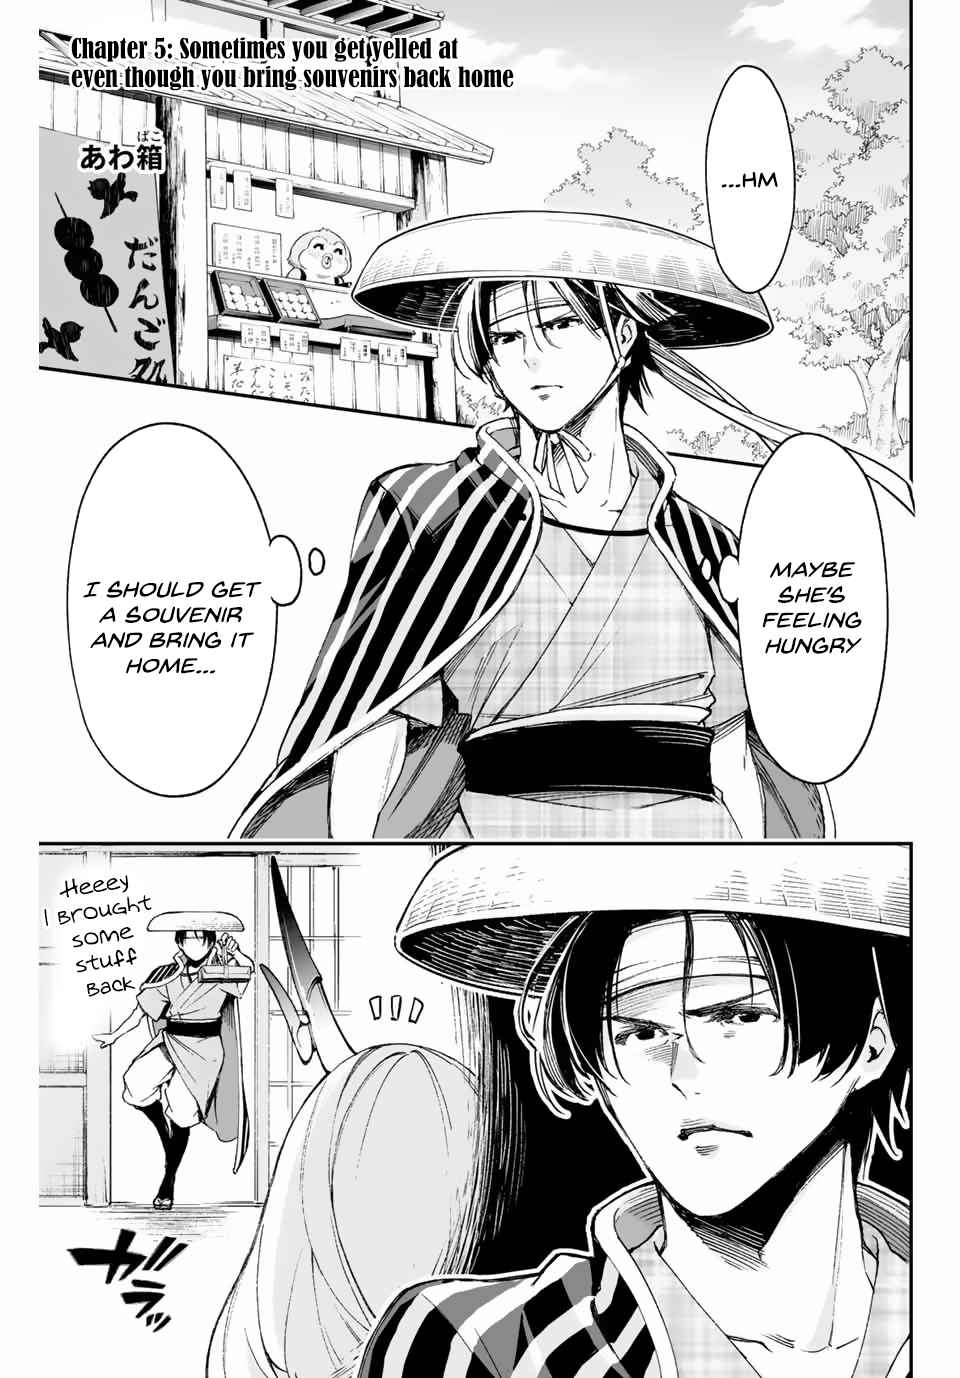 Oniyome wo Metotte Shimatta Ch. 5 Sometimes you get yelled at even though you bring souvenirs back home